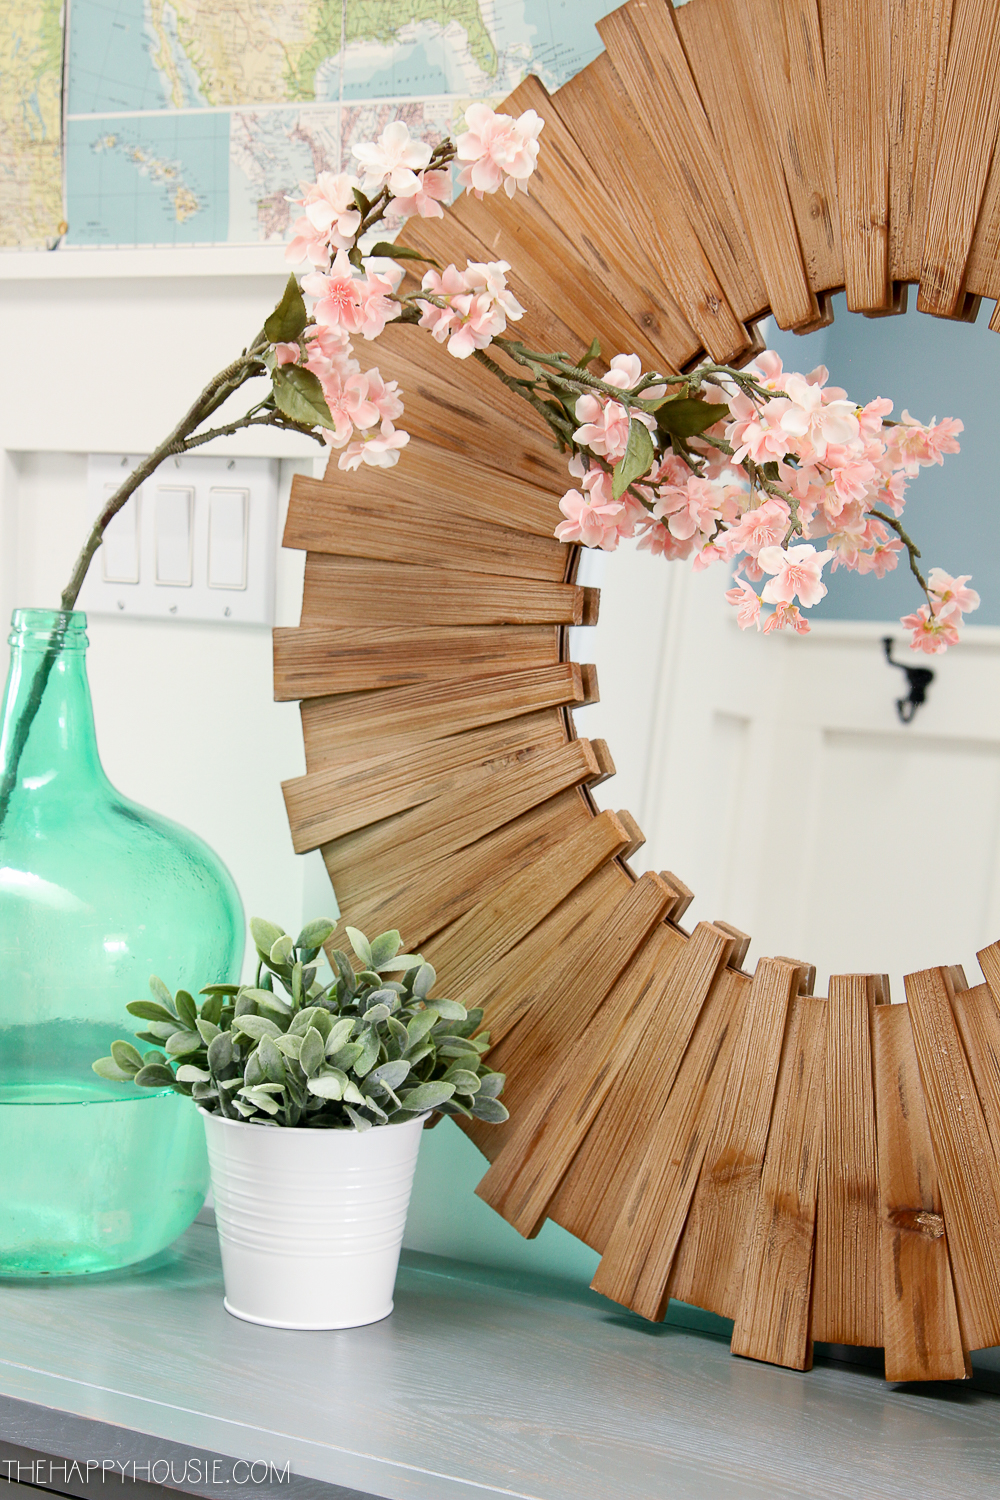 Small pink flowers and a wooden mirror.